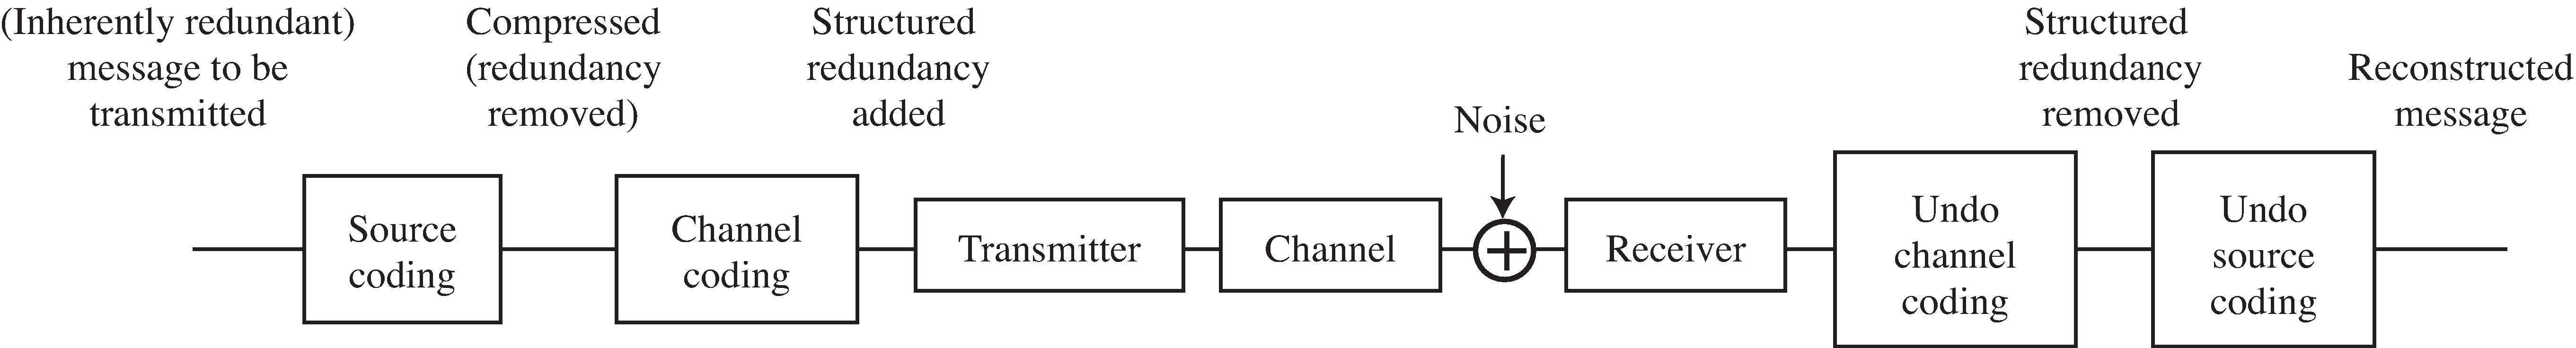 Source and channel coding techniques manage redundancies in digital communication systems: first by removing inherent redundancies in the message, then by adding structured redundancies (which aid in combatting noise problems) and then by restoring the original message.